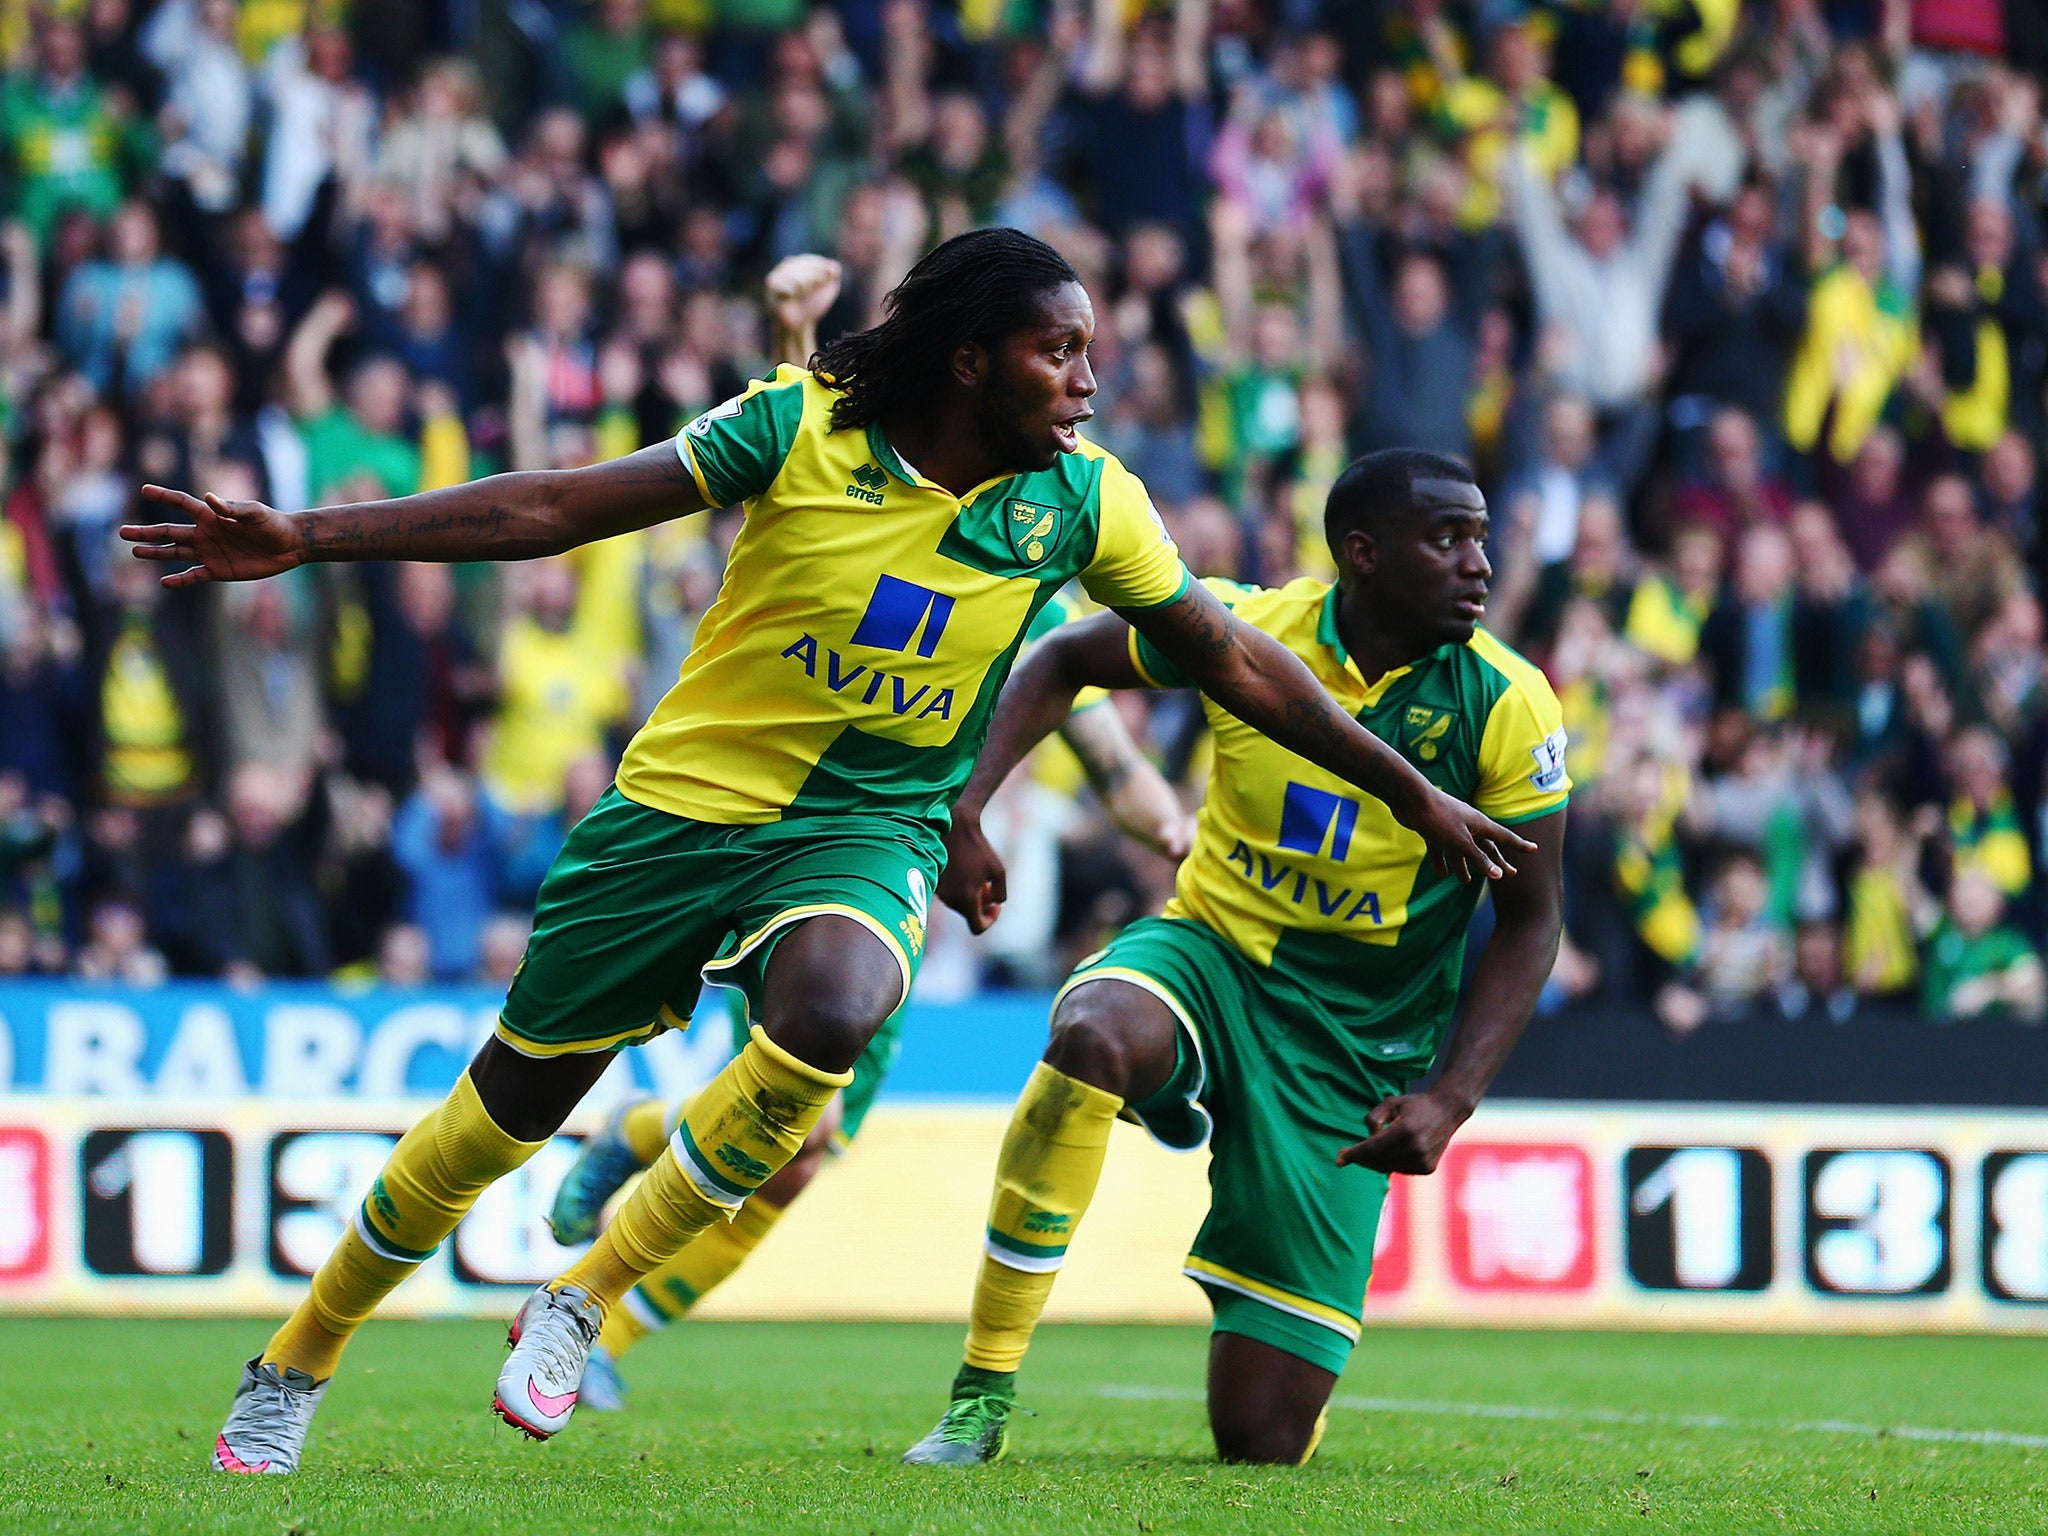 Dieumerci Mbokani celebrates his first goal for his new club